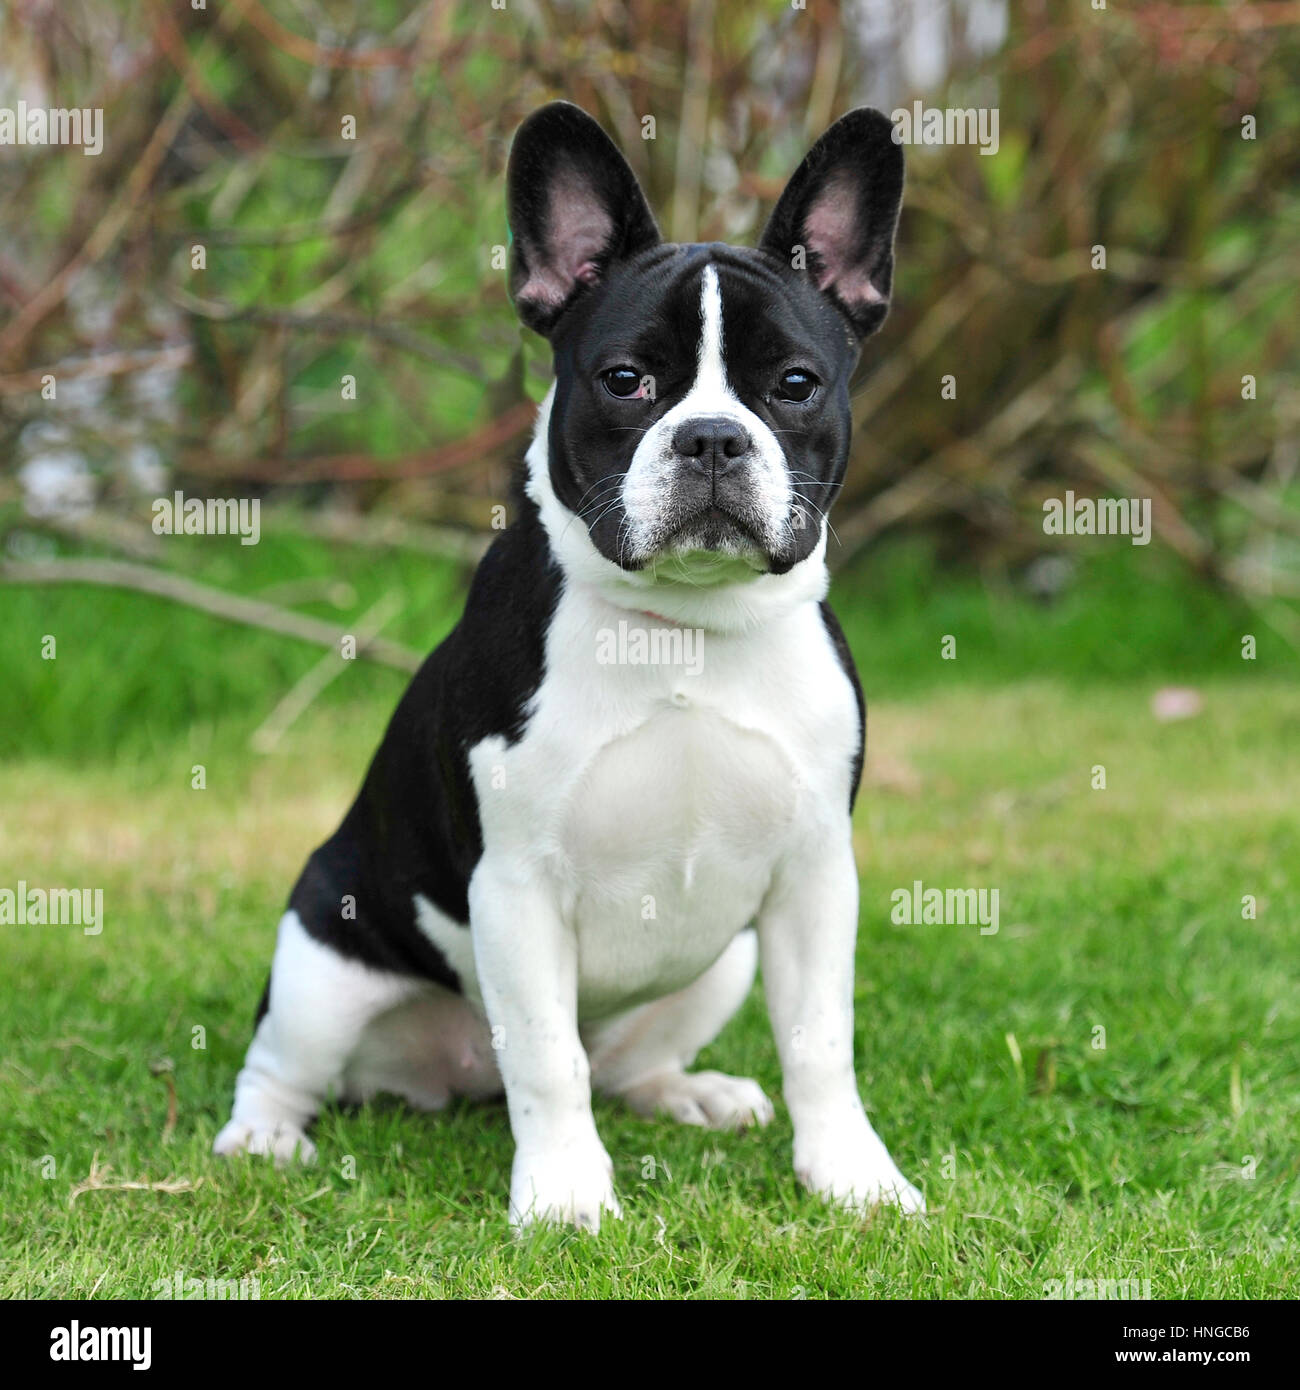 Black And White French Bulldogs